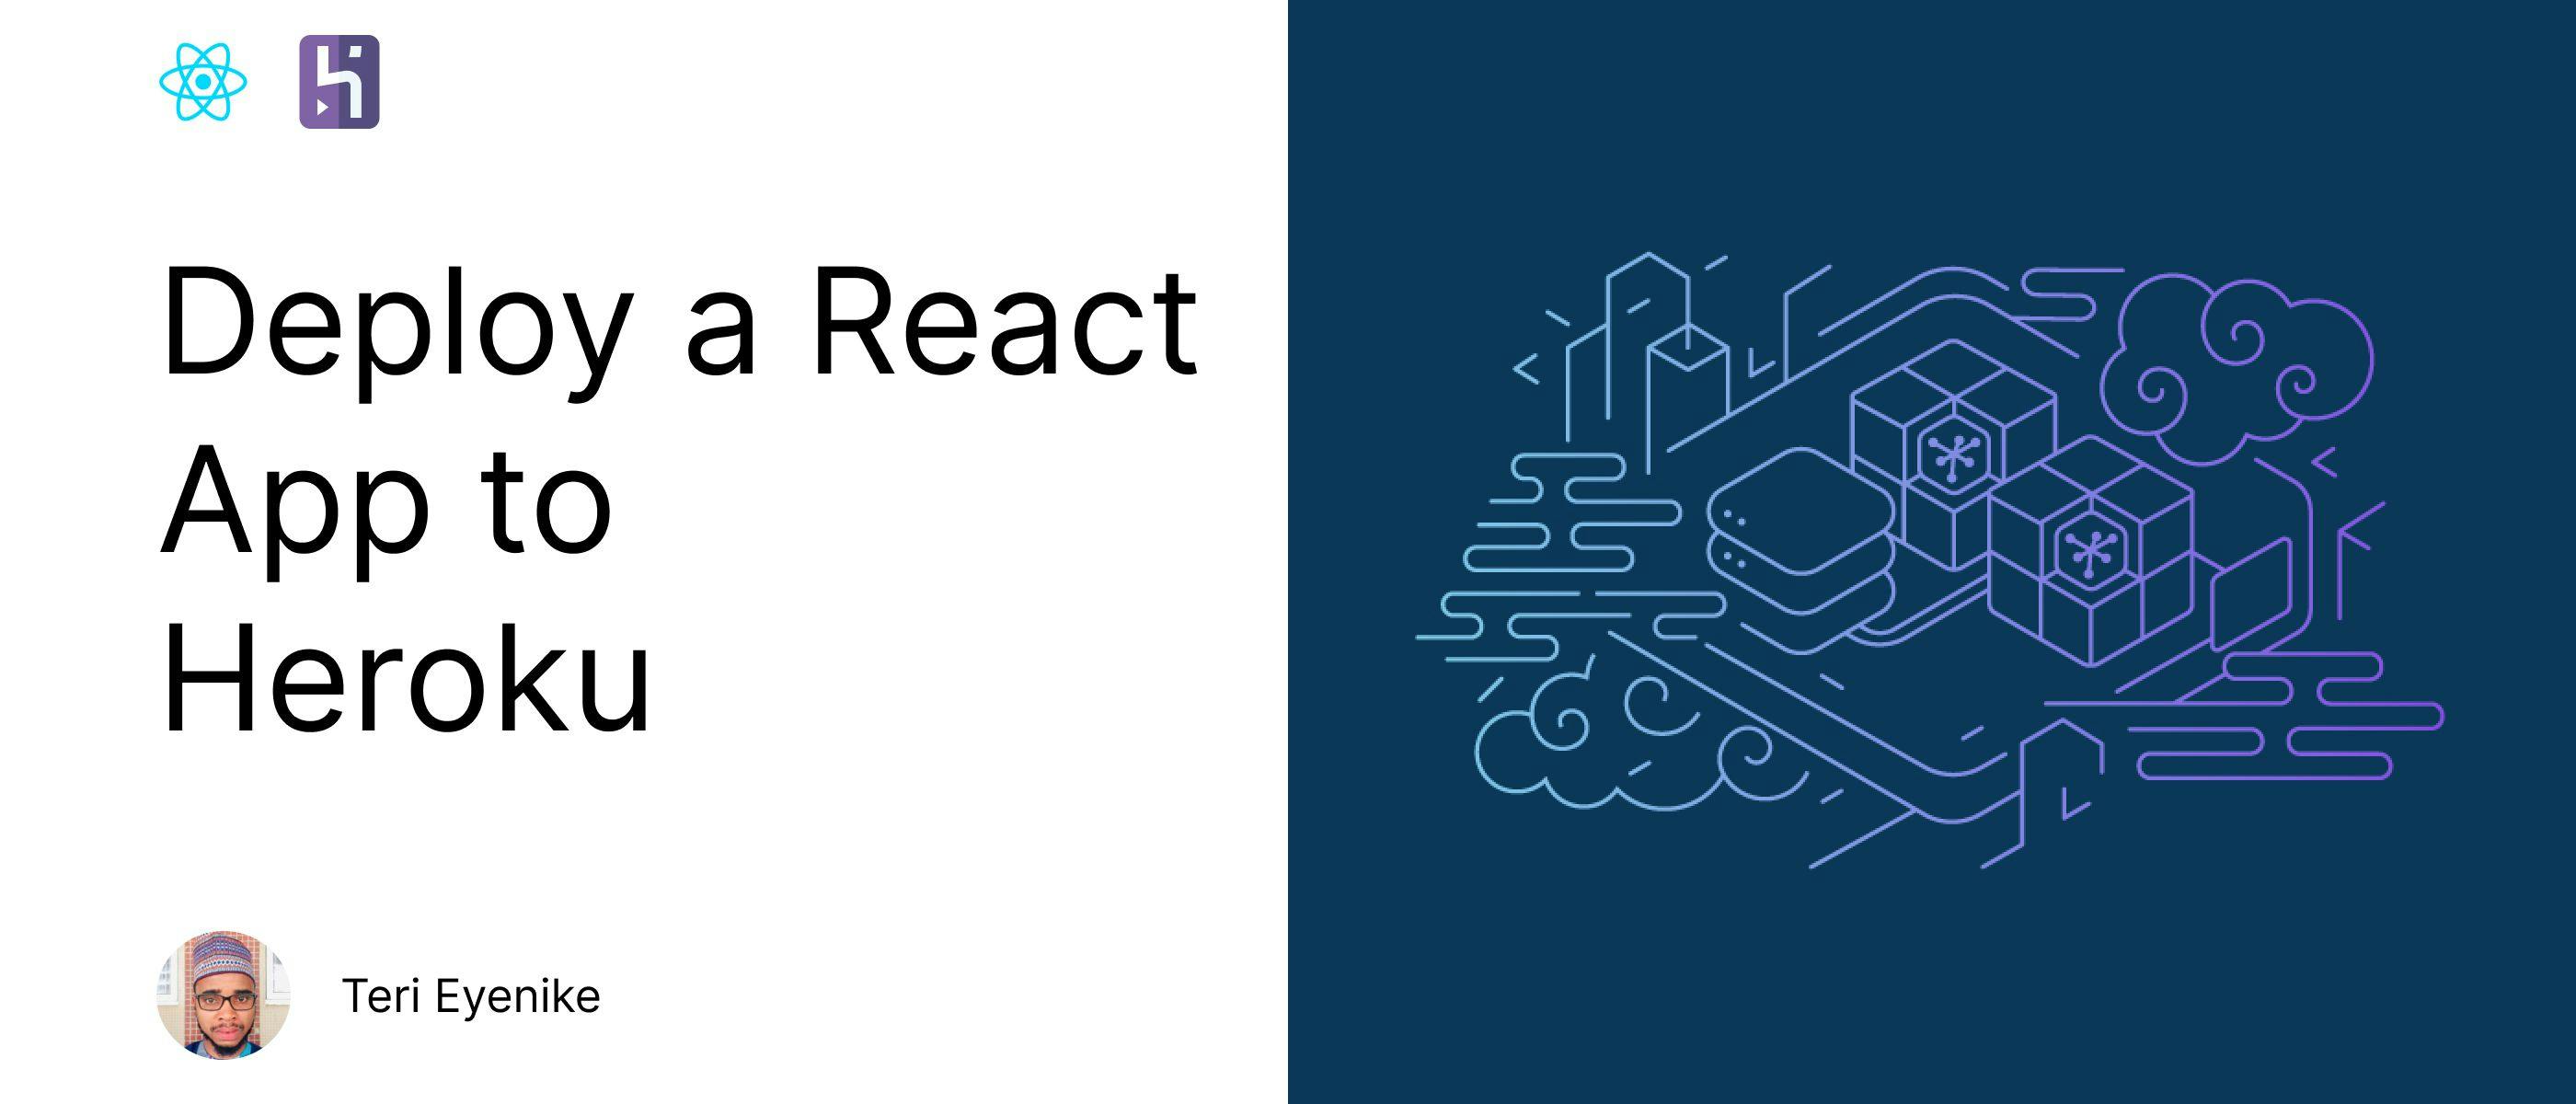 featured image - How to Deploy a React App to Heroku in 5 Minutes in 5 Easy Steps